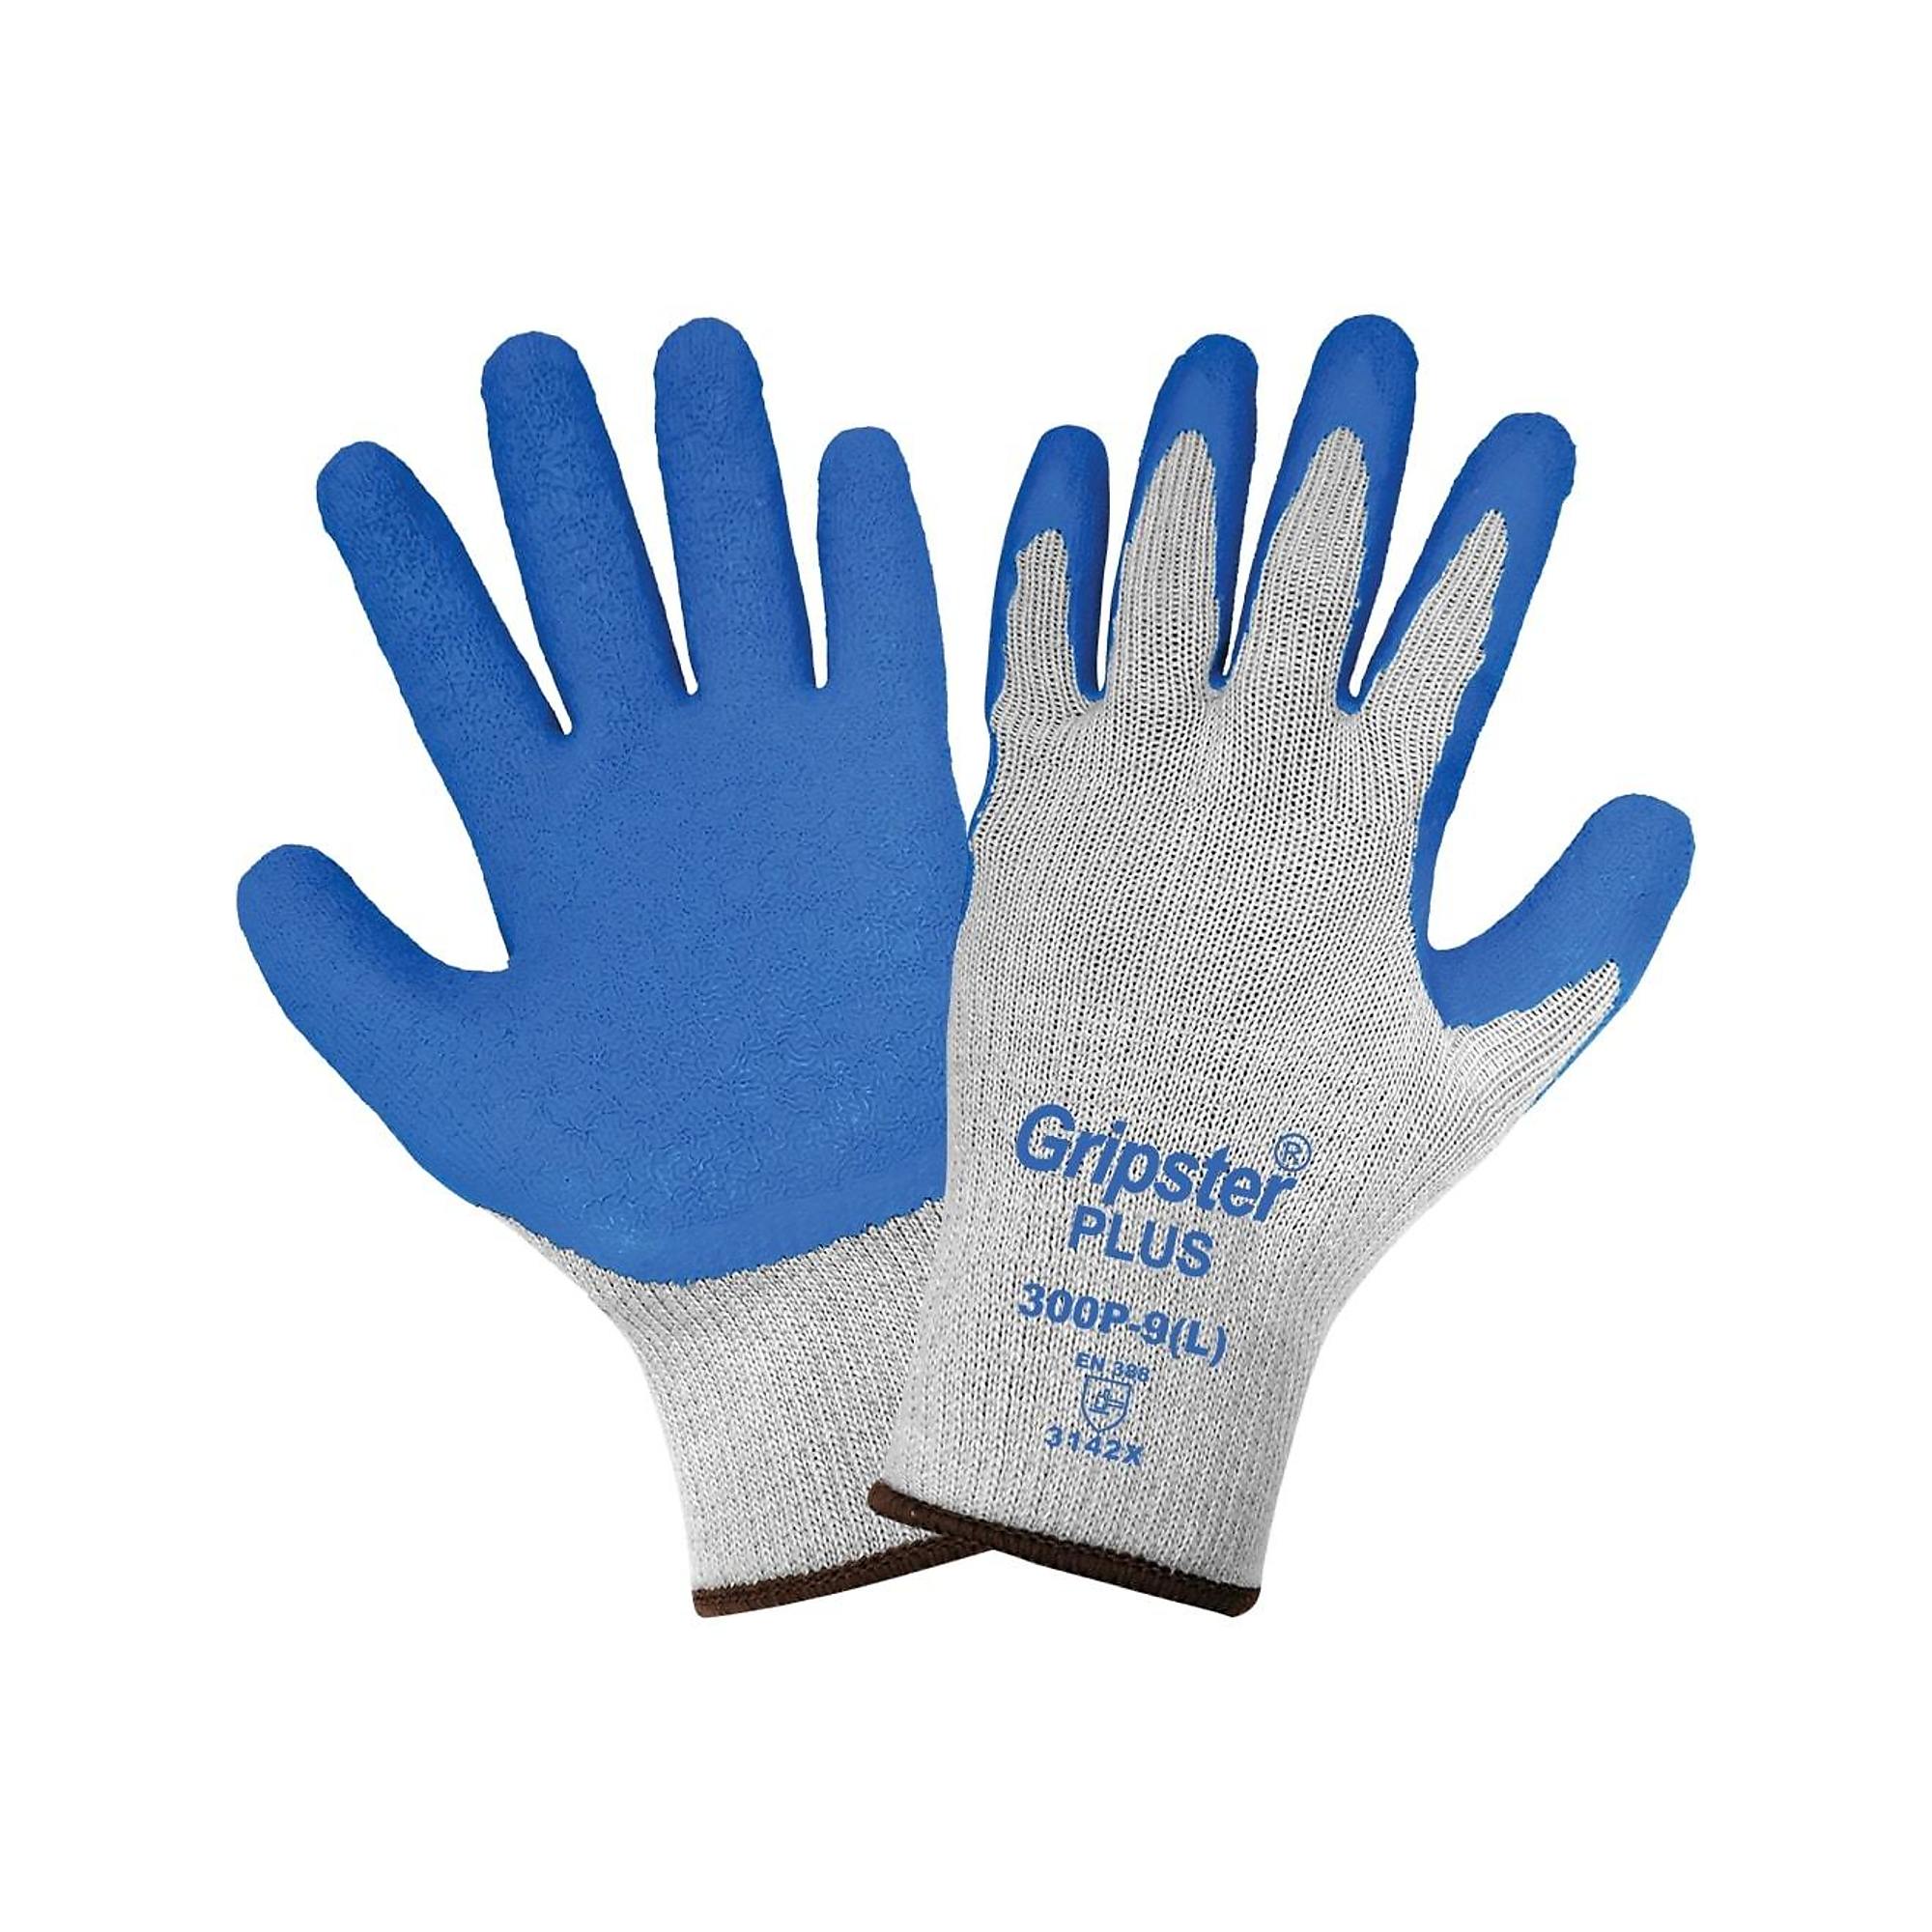 Global Glove Gripster , Gray, Blue Rubber Palm, Cut Resistant A2 Gloves - 12 Pairs, Size M, Color Gray/Blue, Included (qty.) 12 Model 300P-8(M)